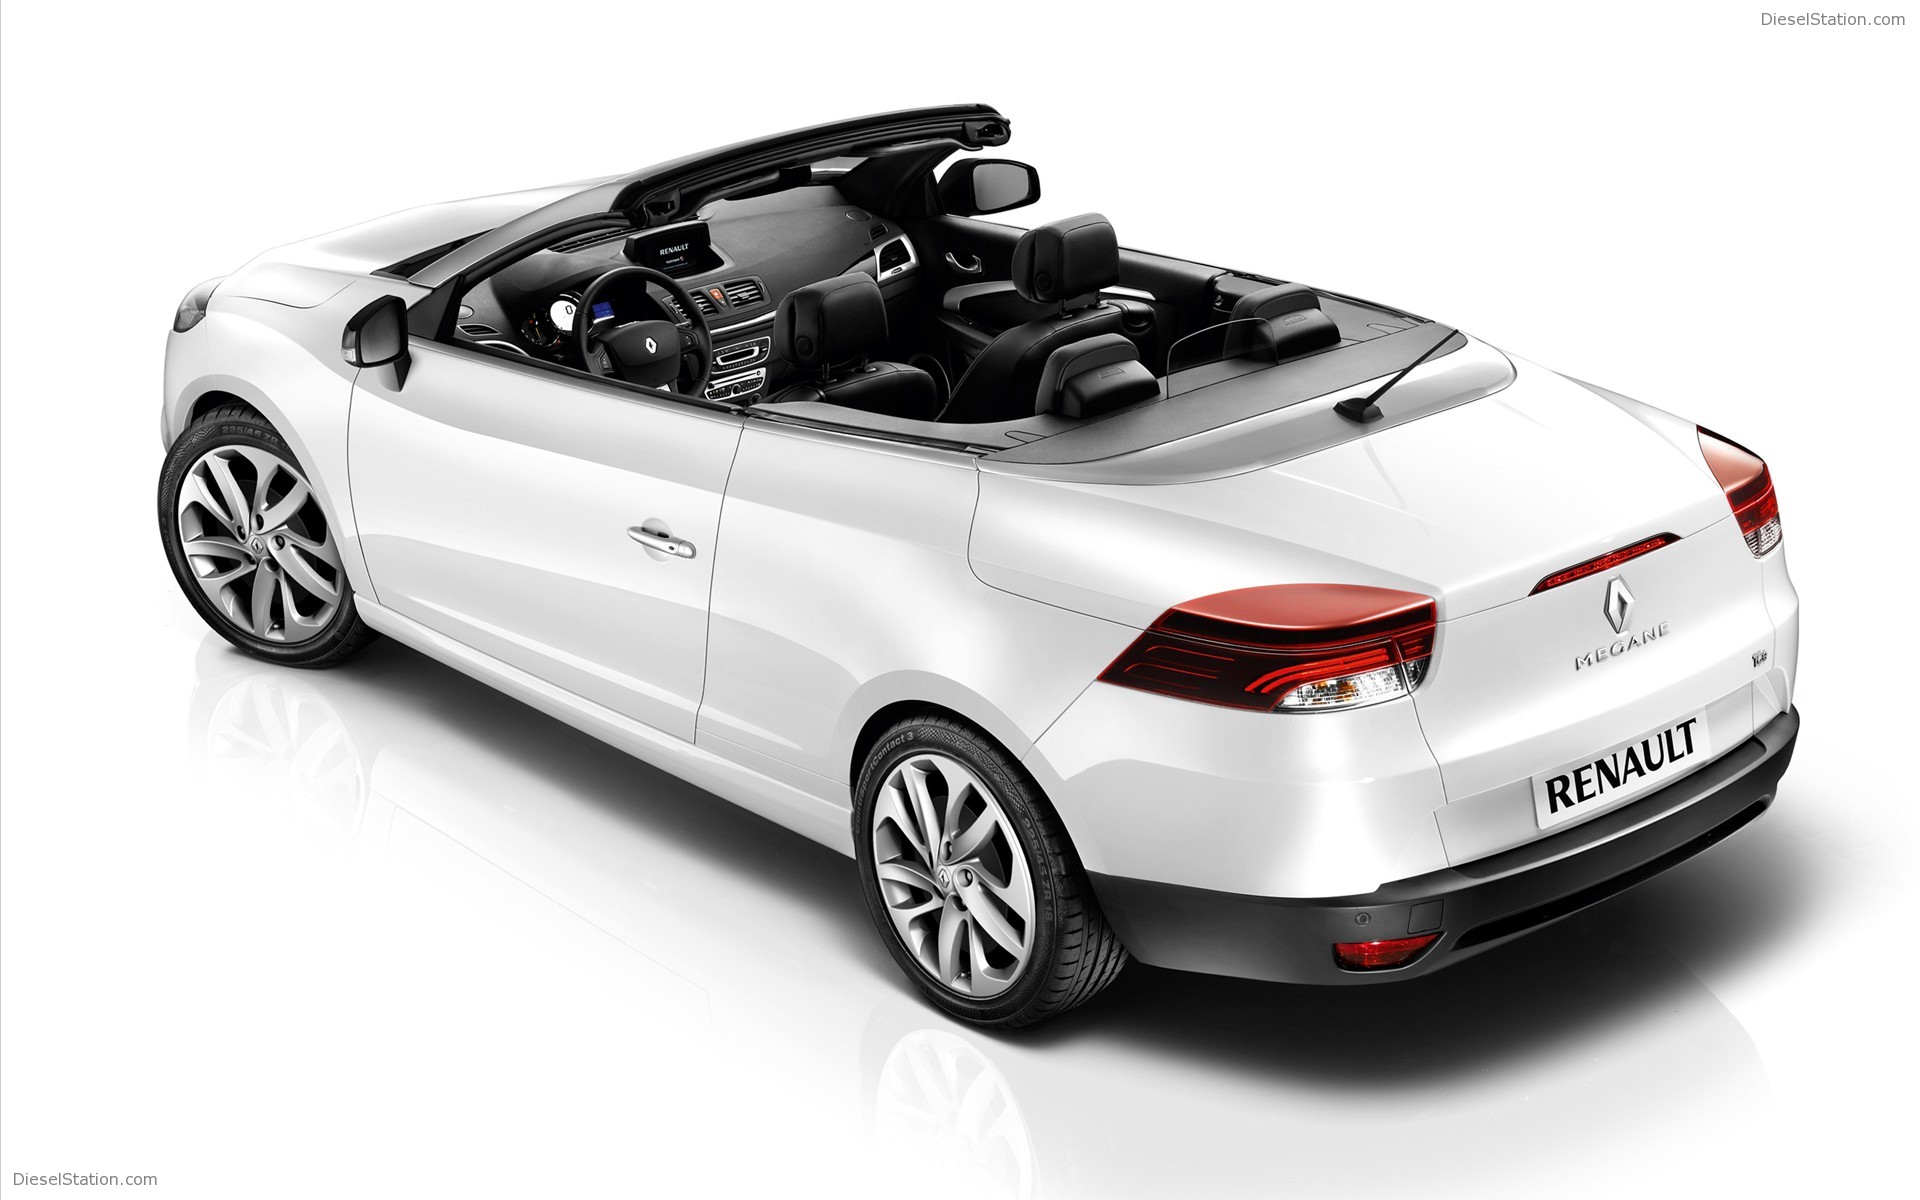 Renault Megane Coupe Cabriolet Widescreen Exotic Car